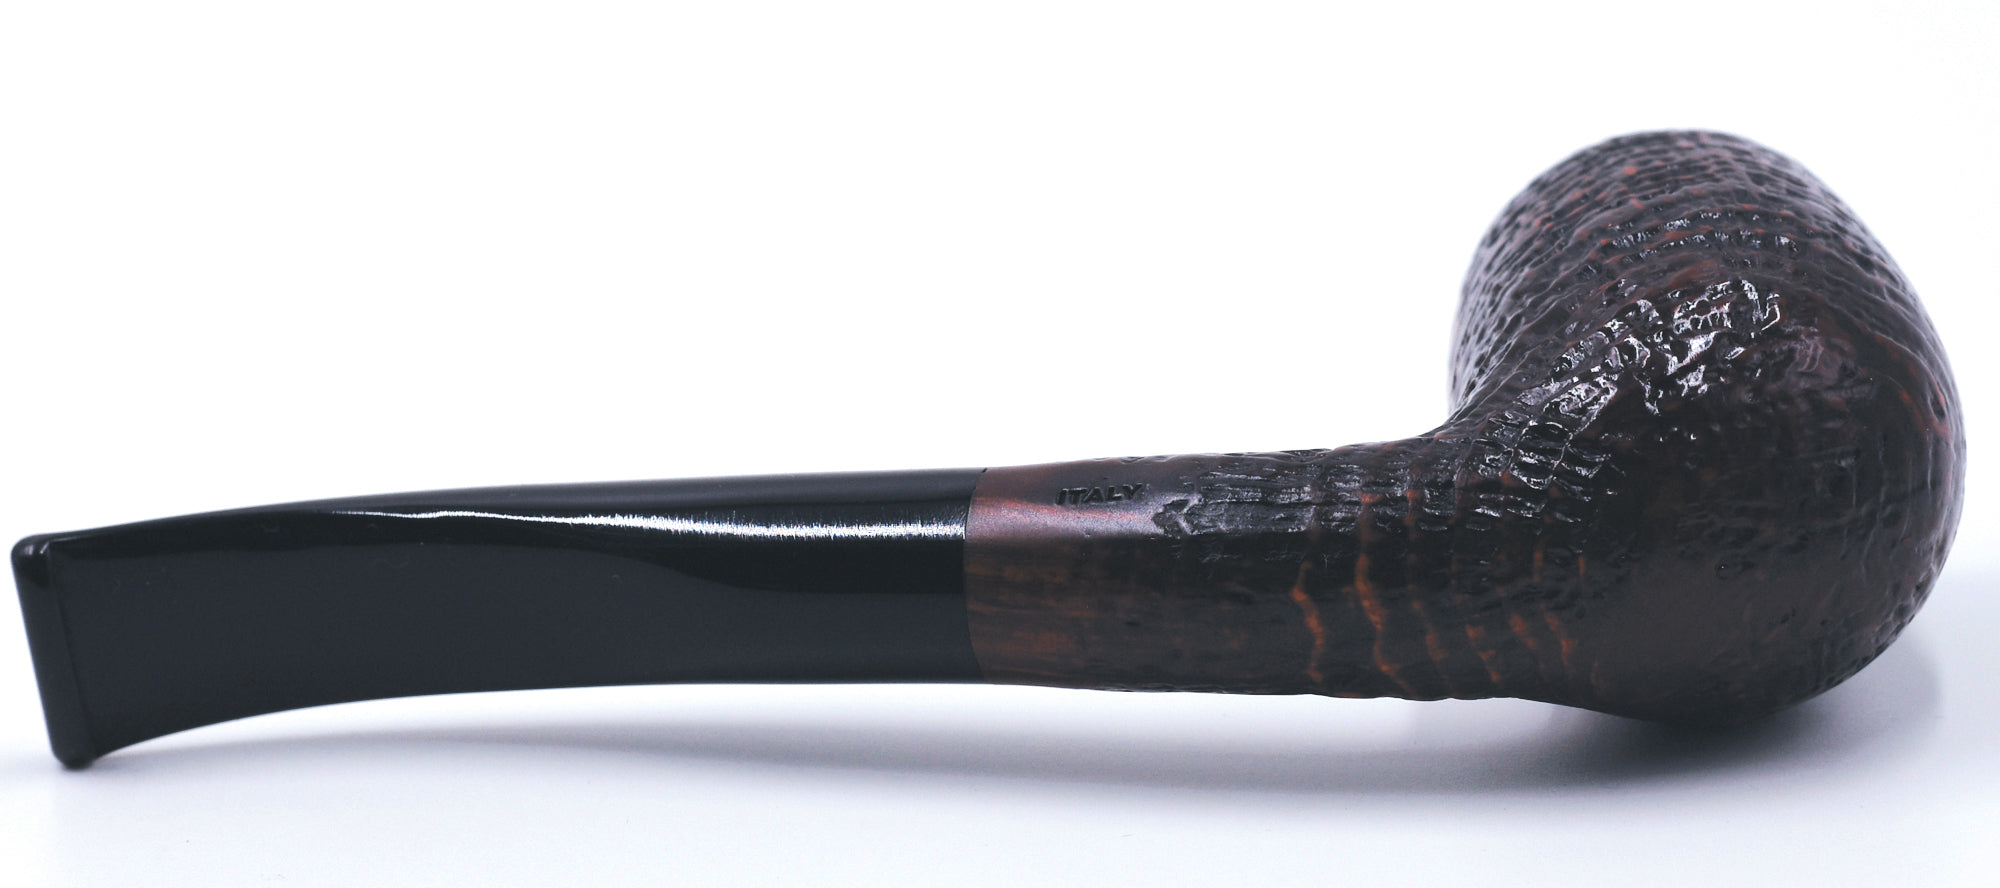 LEGENDEX® PAGANINI* 9 MM Filtered Briar Smoking Pipe Made In Italy 01-08-327A